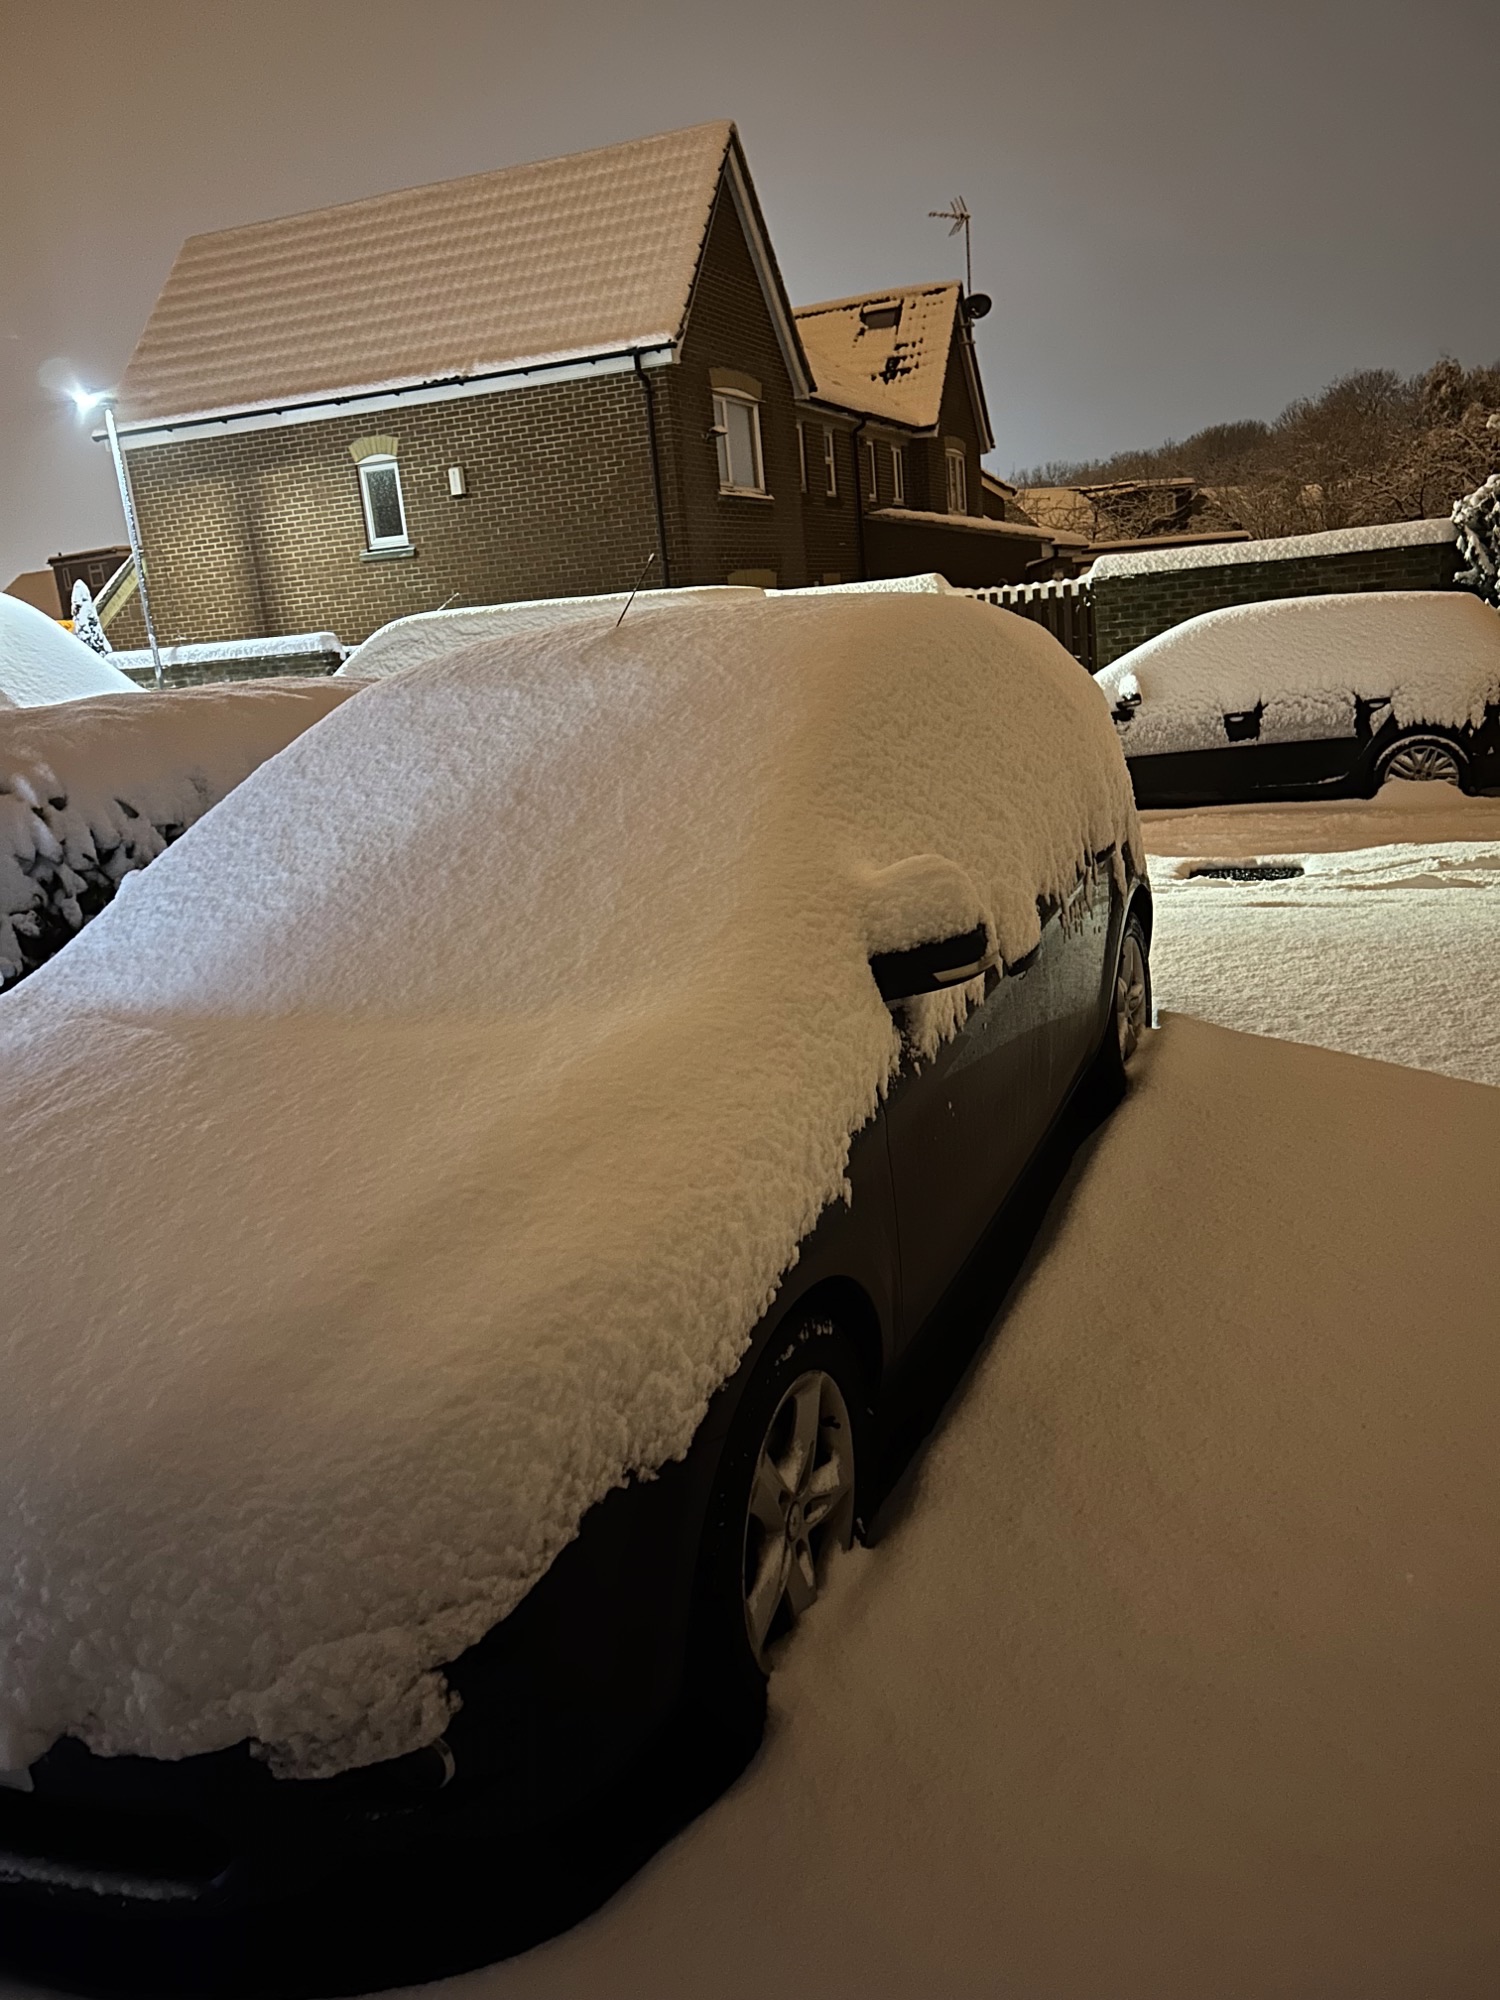 Cars covered in snow from a wintery blast